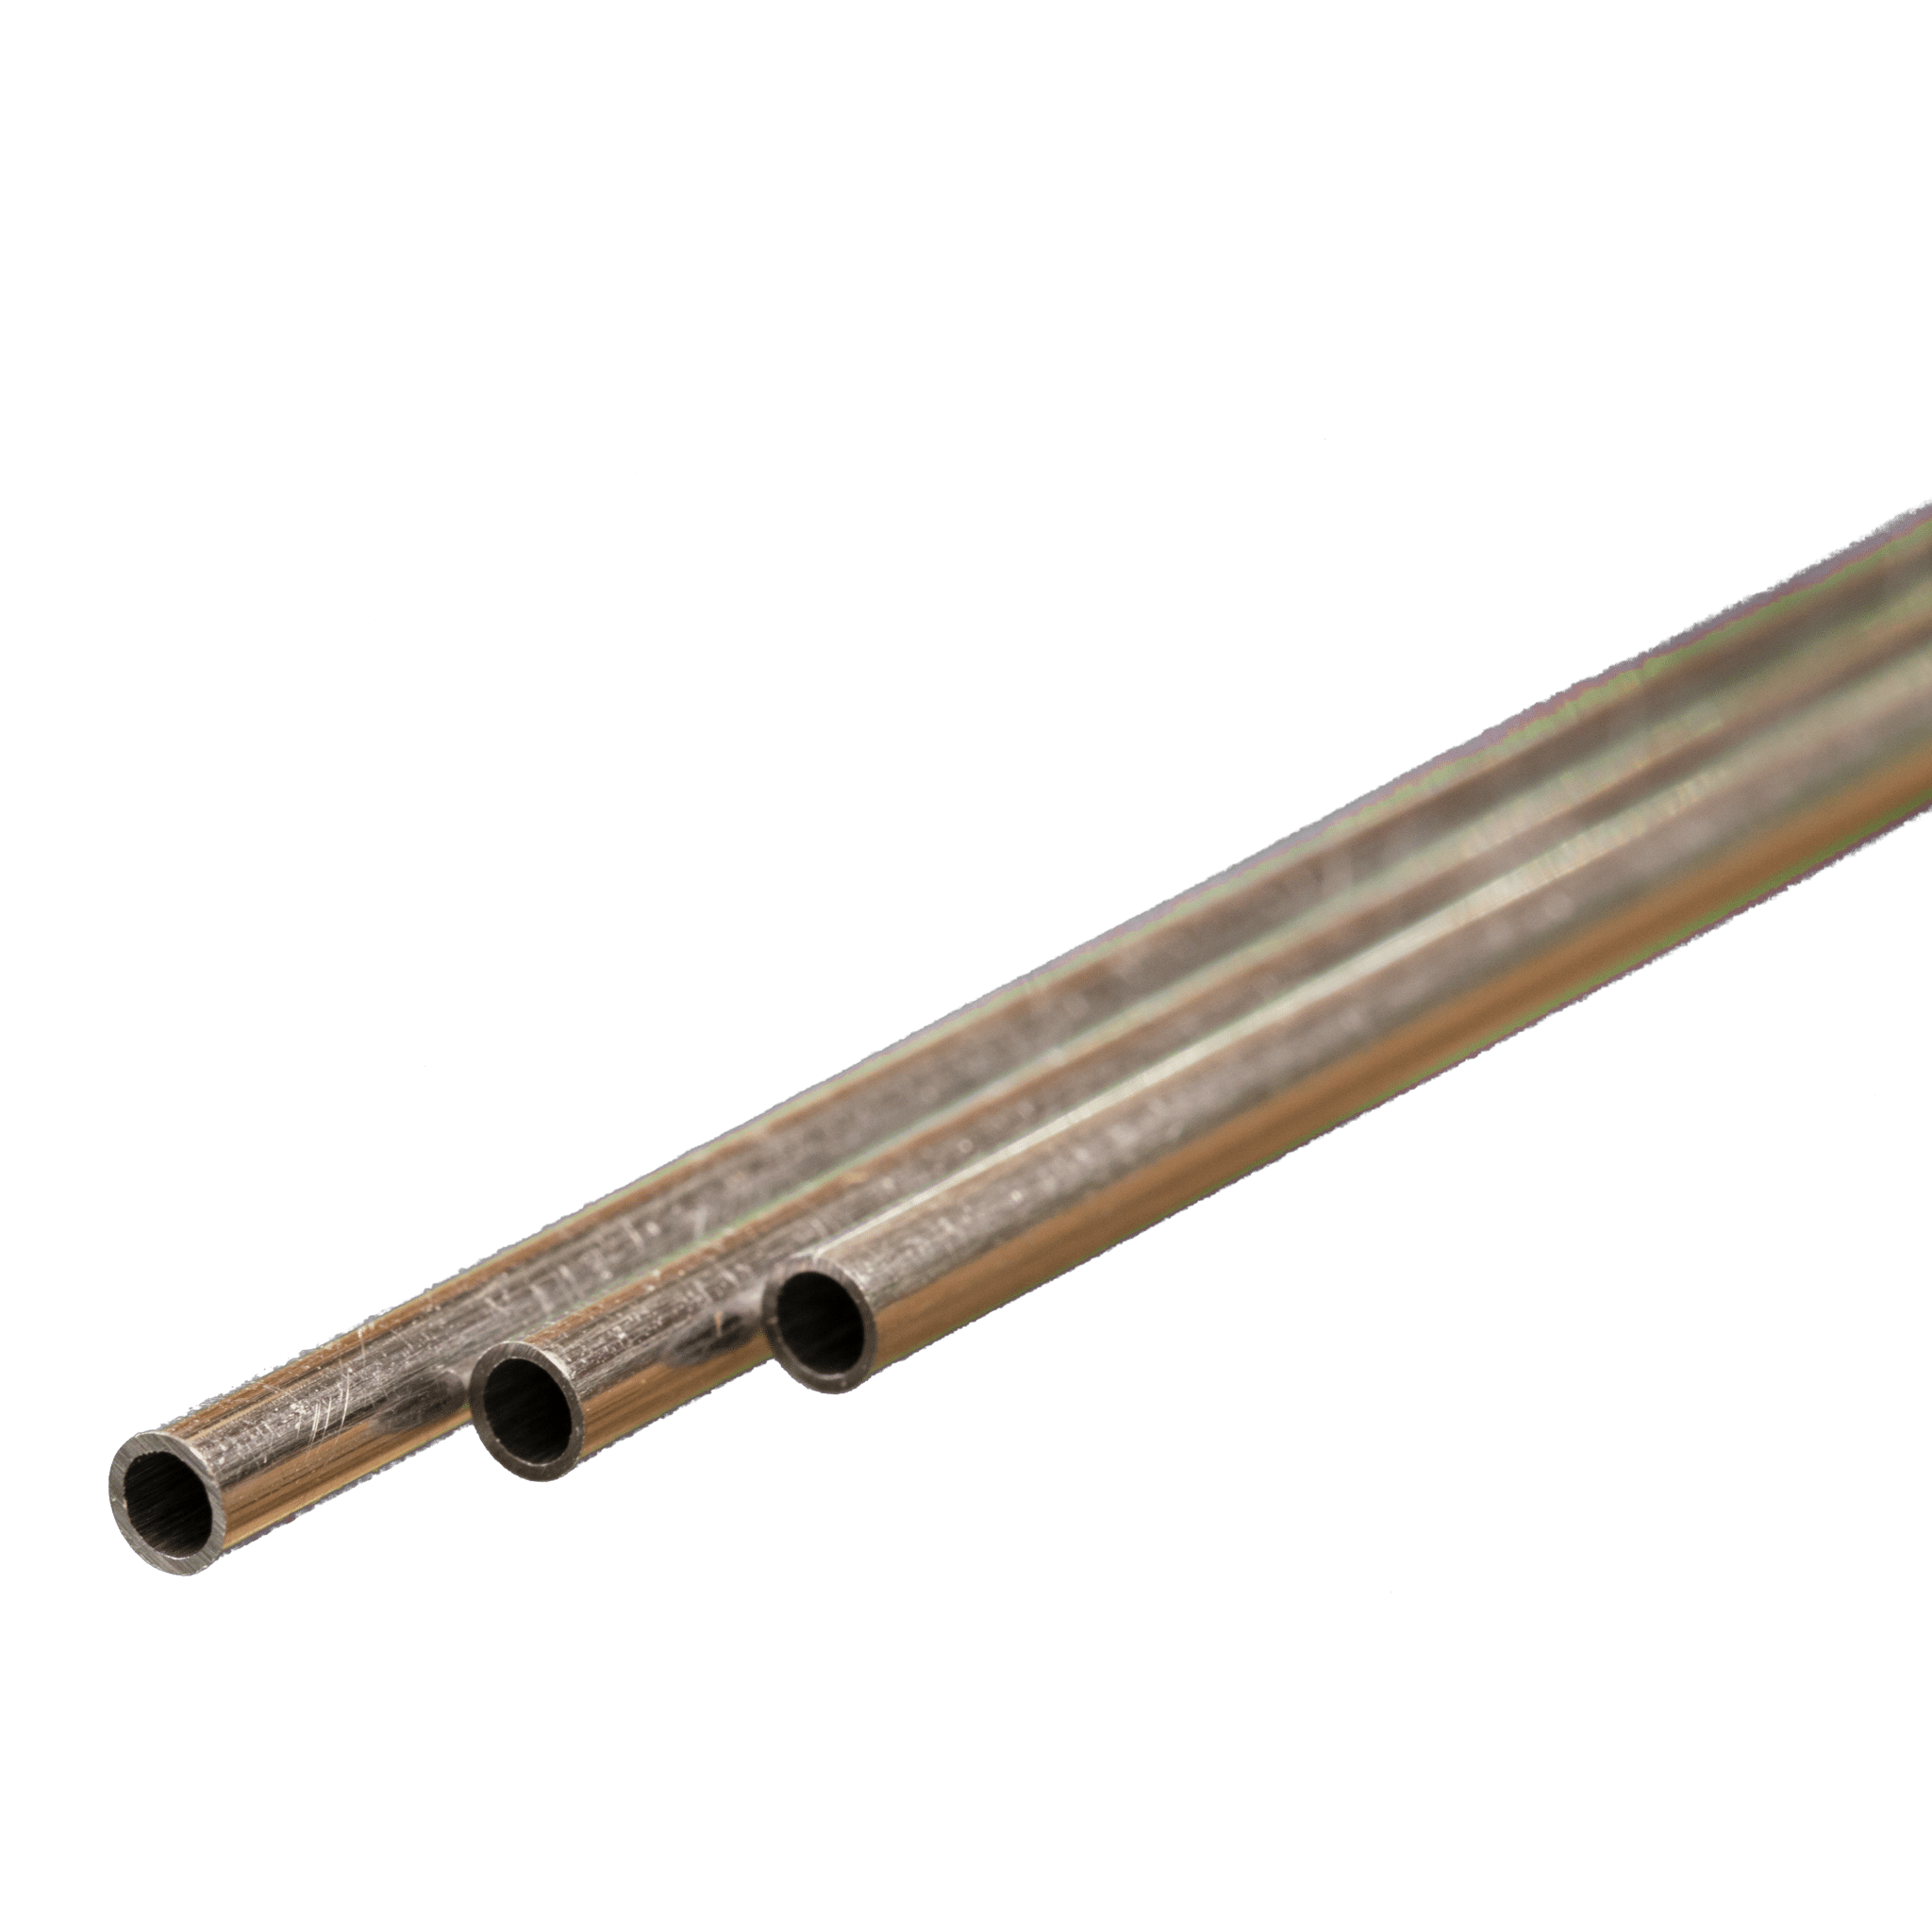 K&S Metals 8101 Round Aluminum Tube 3/32" OD x 0.014" Wall x 12" Long (3 Pieces)